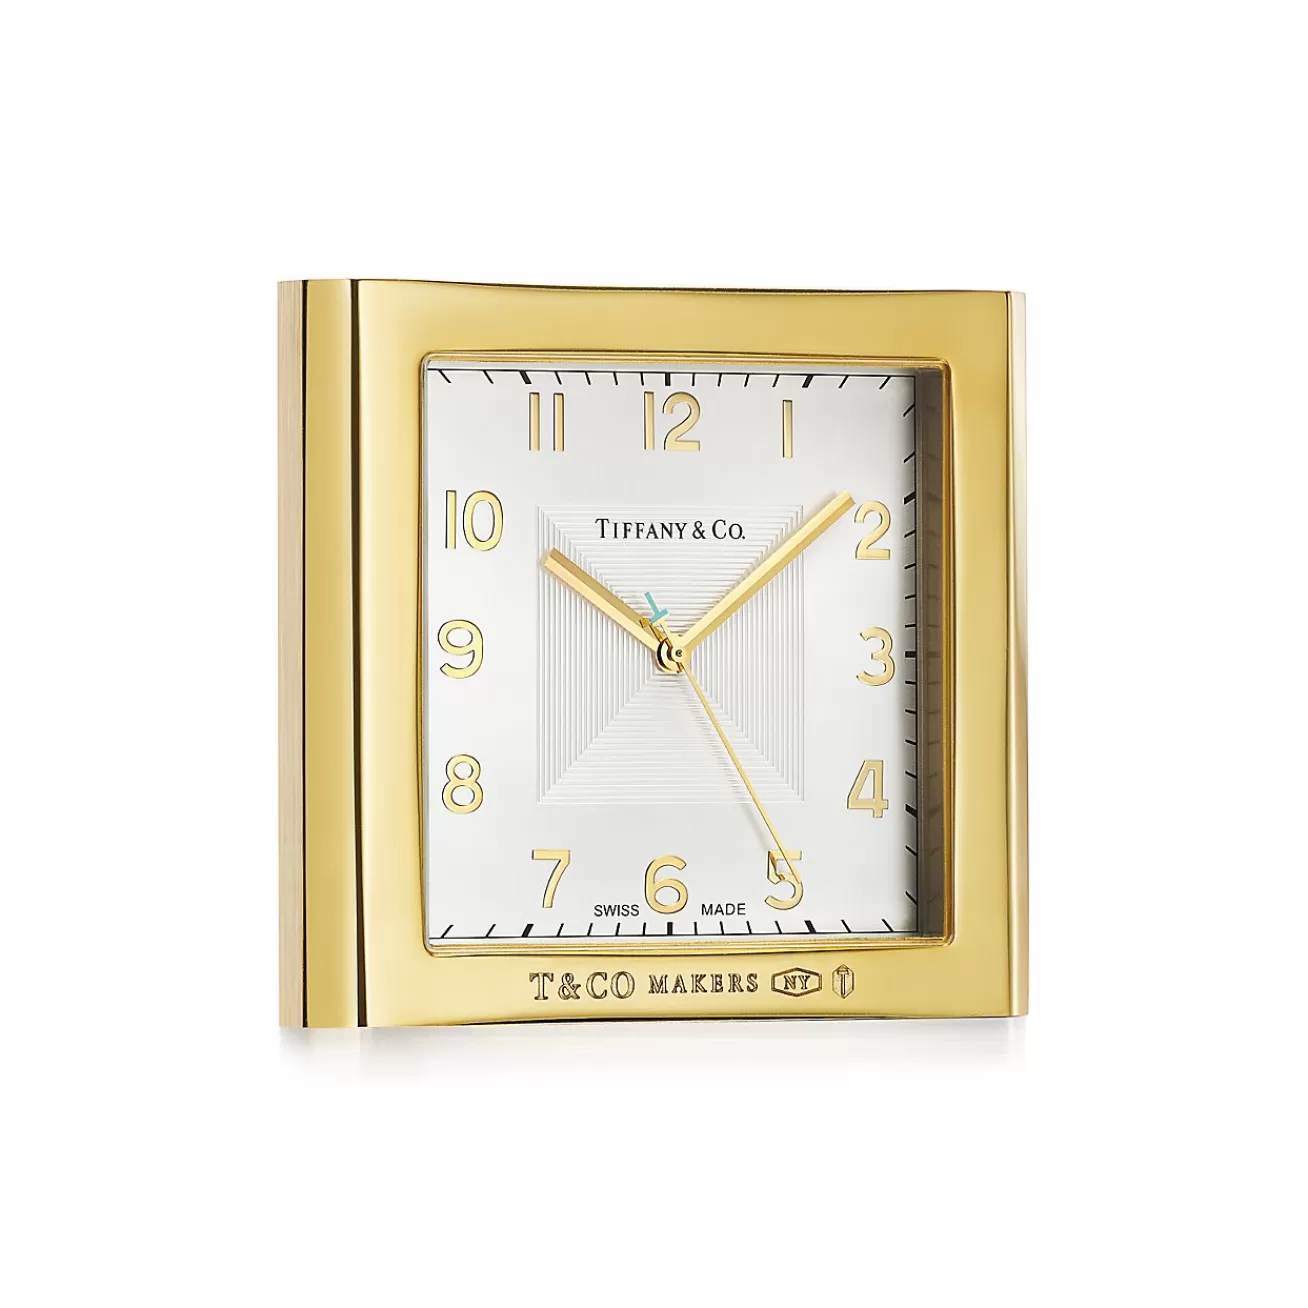 Tiffany & Co. Tiffany 1837 Makers Clock in Brass | ^ Business Gifts